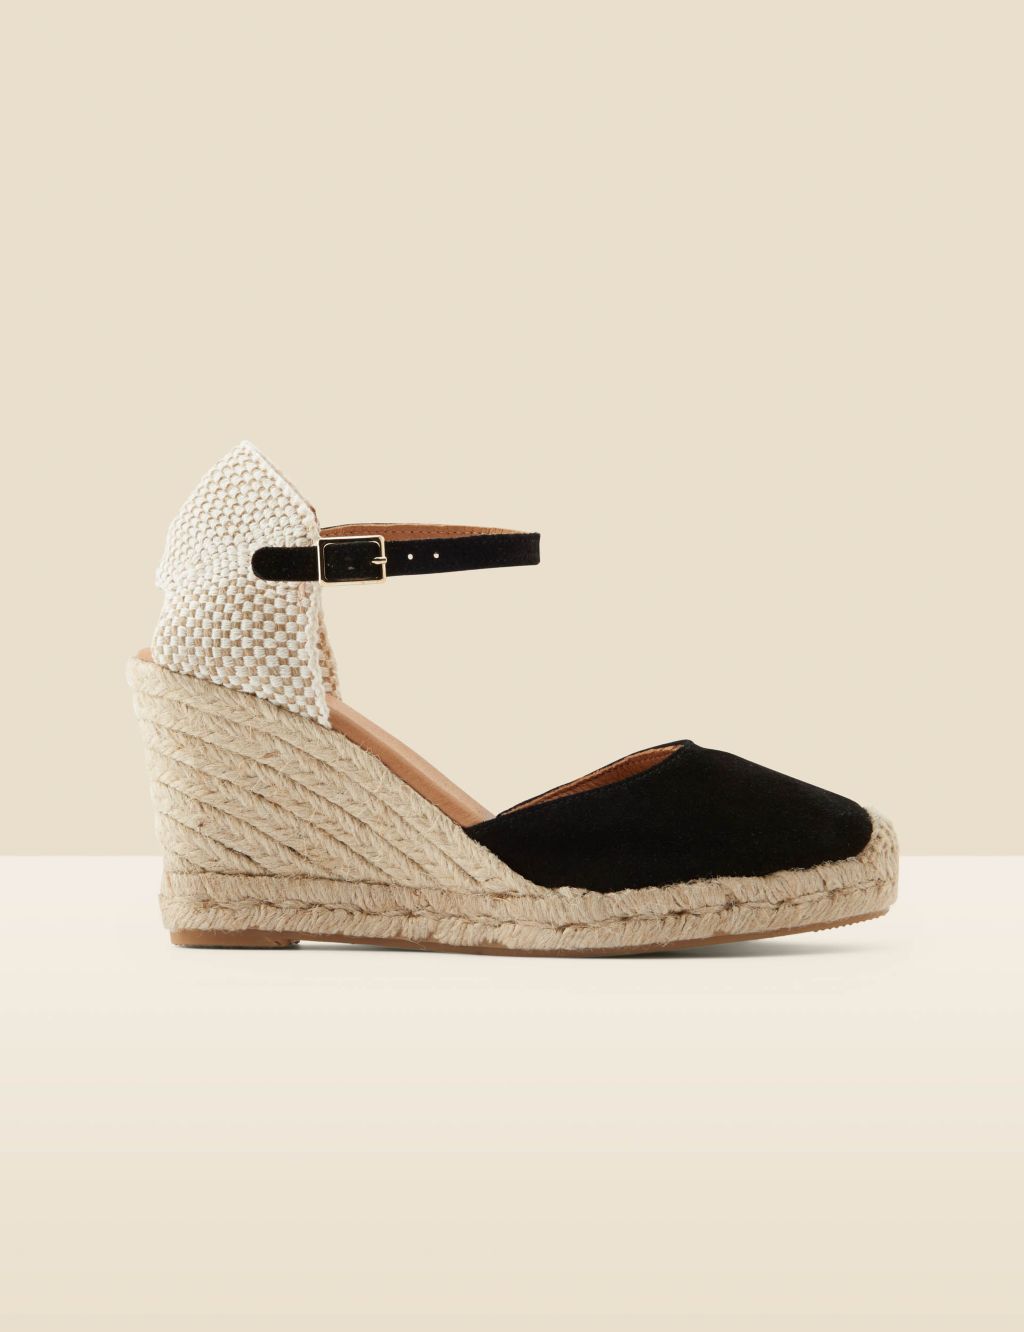 Suede Ankle Strap Wedge Espadrilles image 1